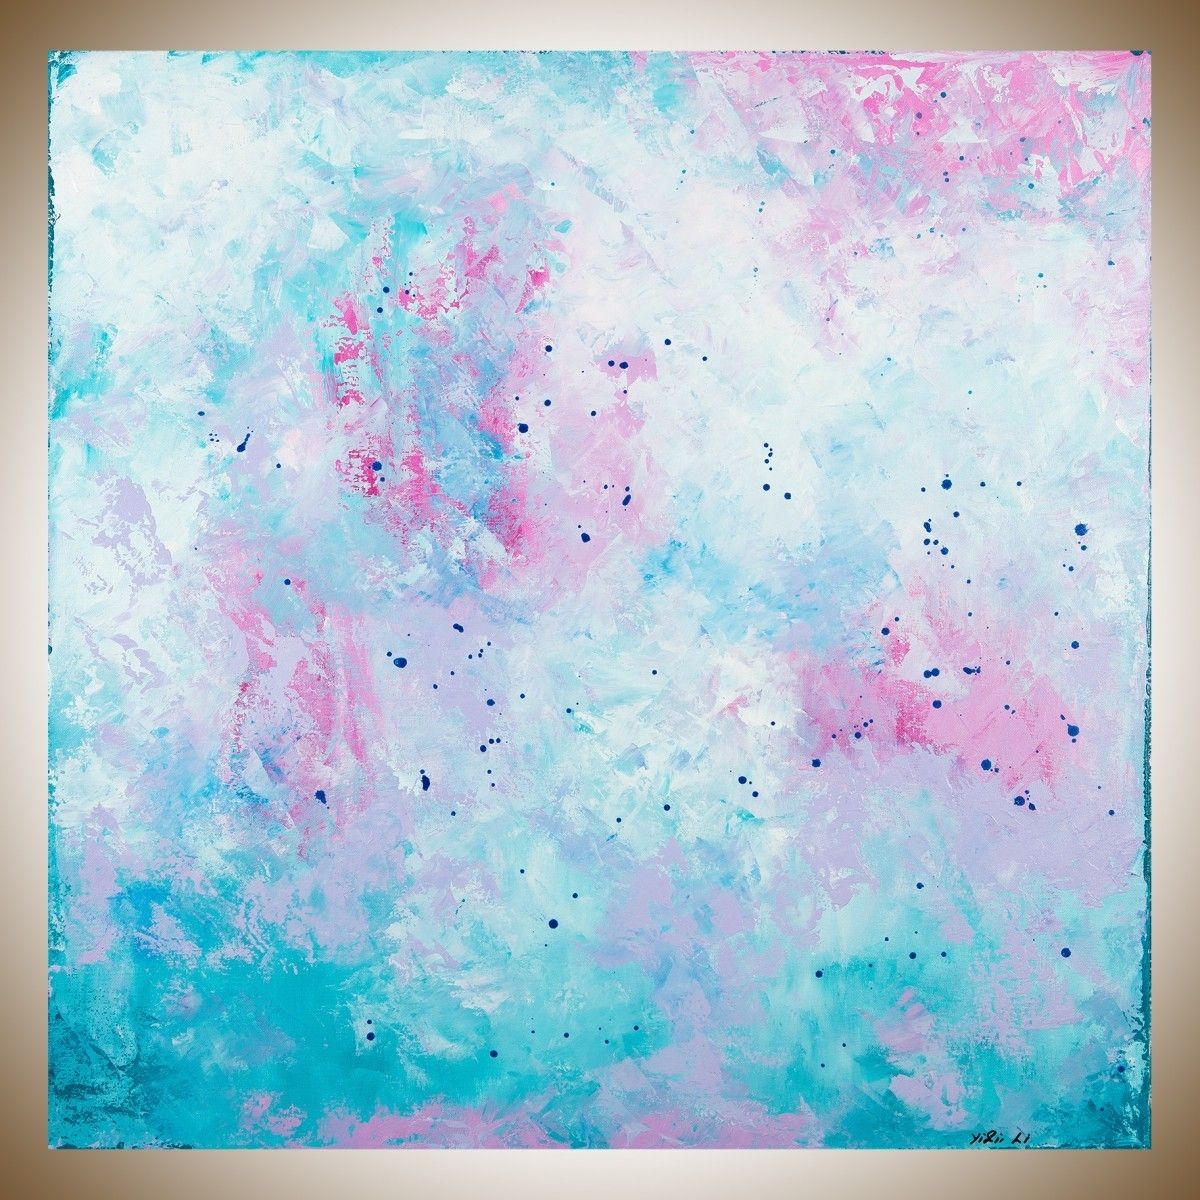 Brilliant Skyqiqigallery 30"x30" Abstract Painting Original Within Newest Pink Abstract Wall Art (View 18 of 20)